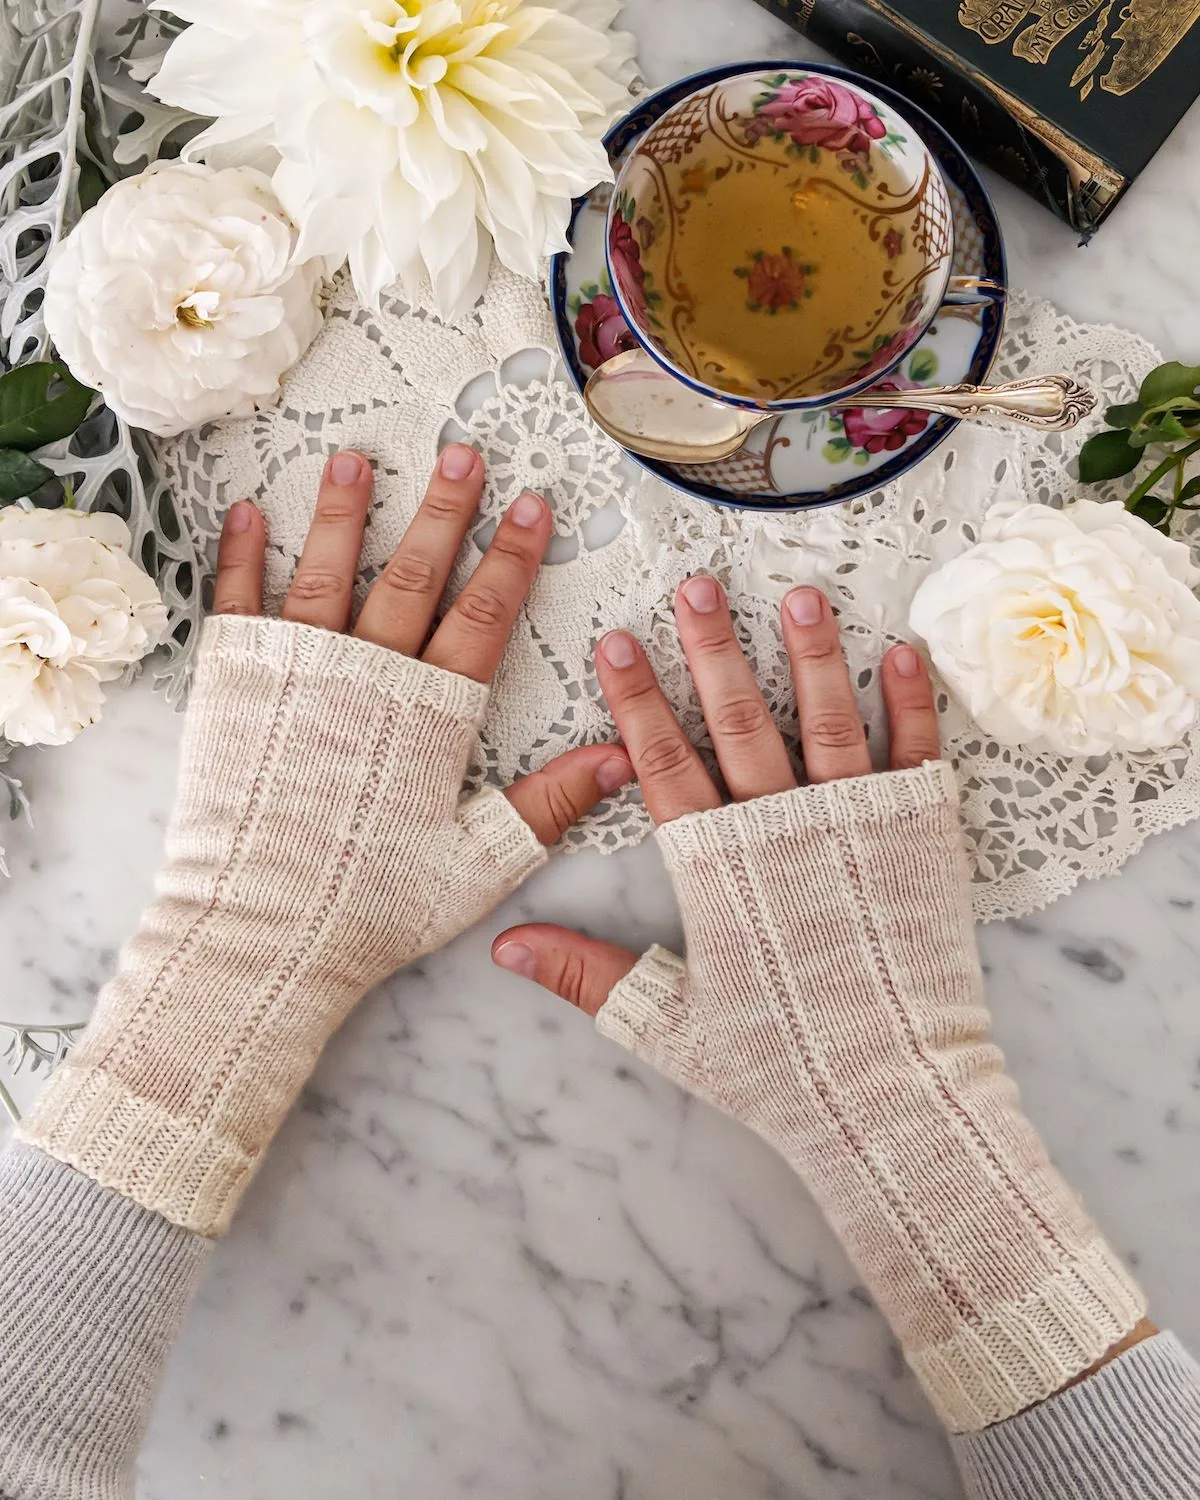 A woman's hands are splayed out on a countertop wearing pale pink fingerless mitts with cream contrasting trim. There are roses, dahlias, and a teacup full of tea, too.